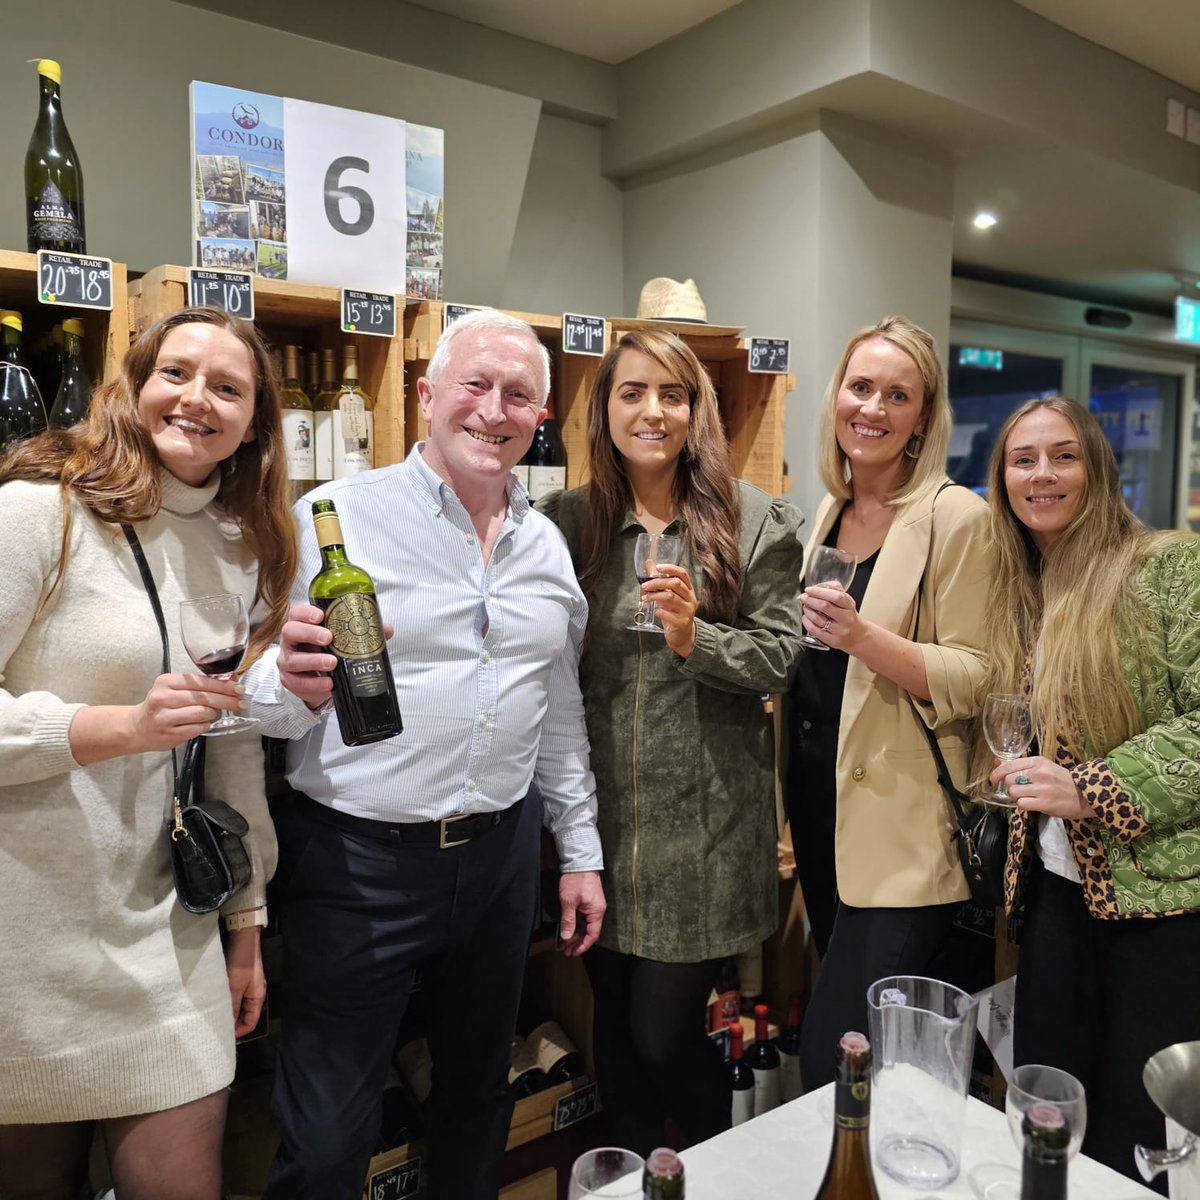 ⛴️  Condor on Tour! ⛴️

Fabulous day on the Isle of Man with @WineCellar_IOM

Thanks to everyone who dropped by to taste and said such nice things about our wines

#condorontour #condorwines #wine #winetasting #winesofargentina #winesofchile #winesofuruguay #southamericanwines